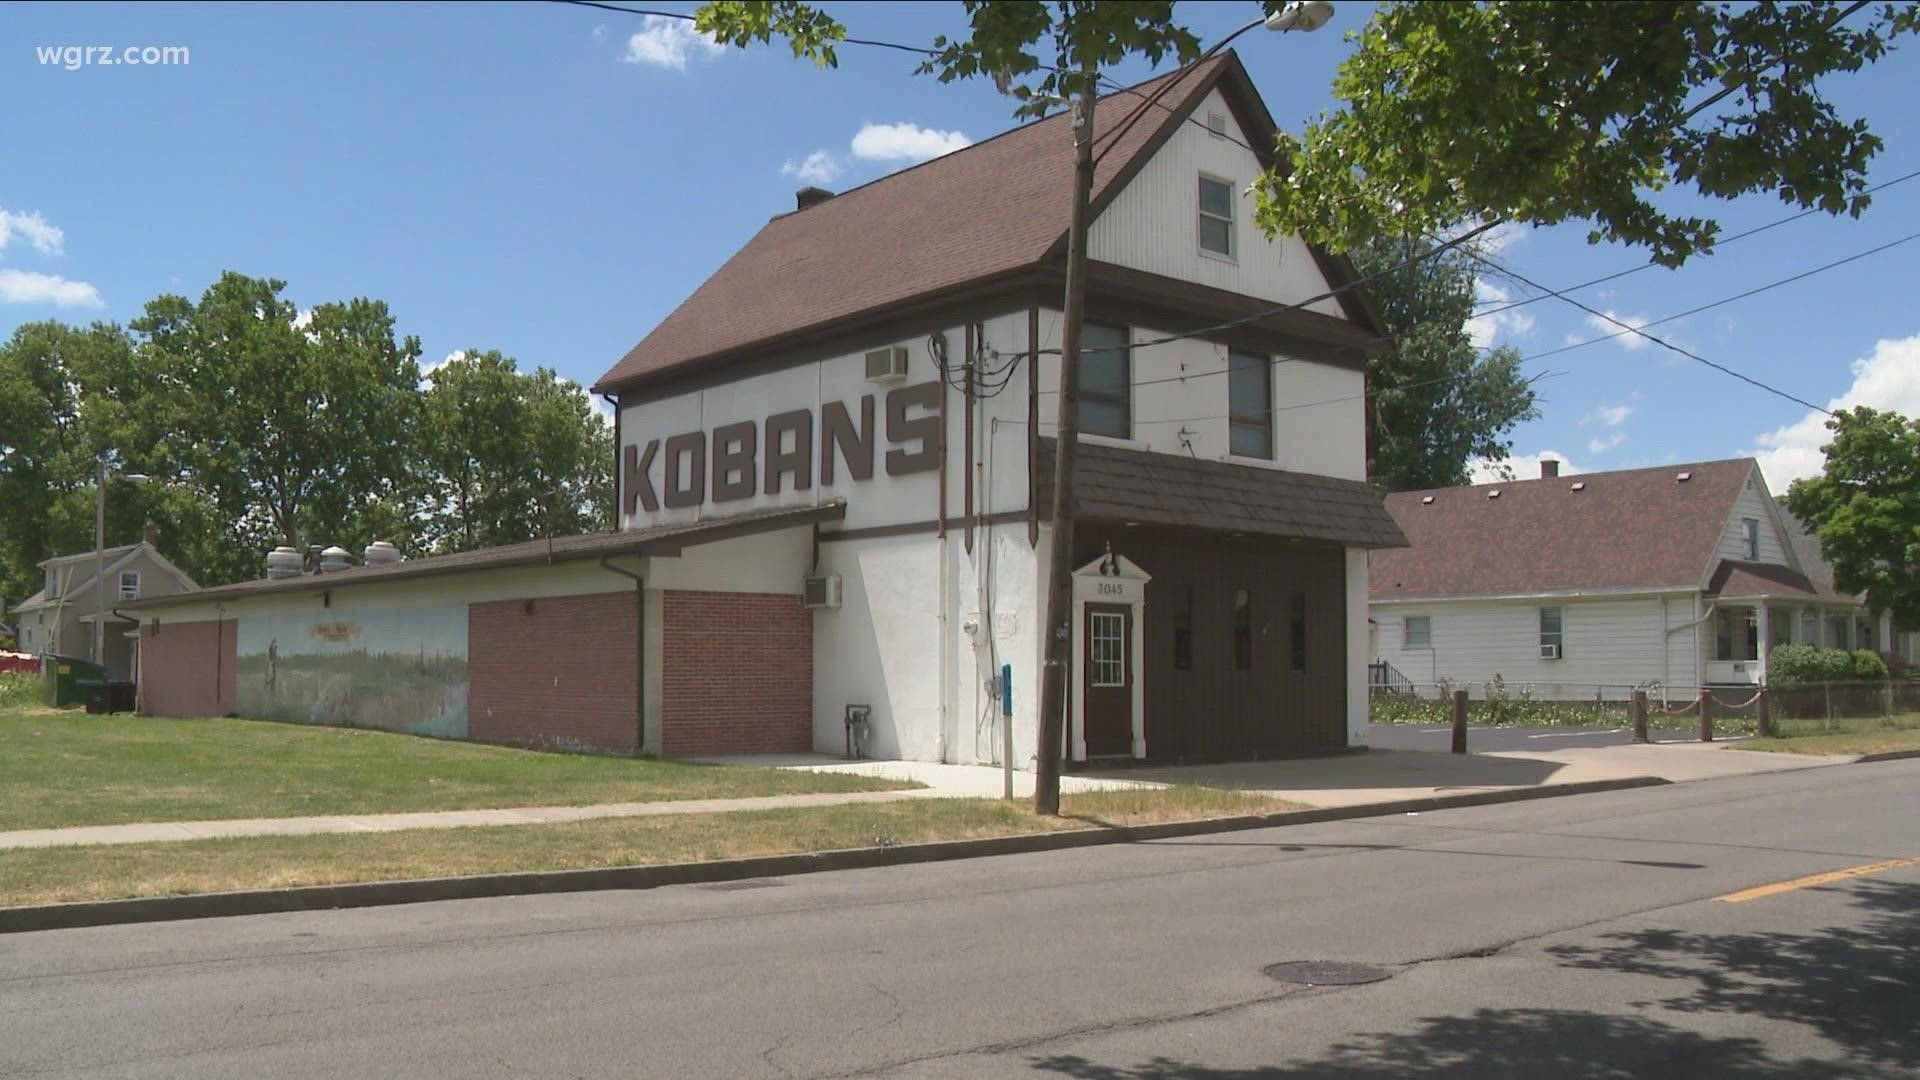 Kobans restaurant closing after 42 years in business